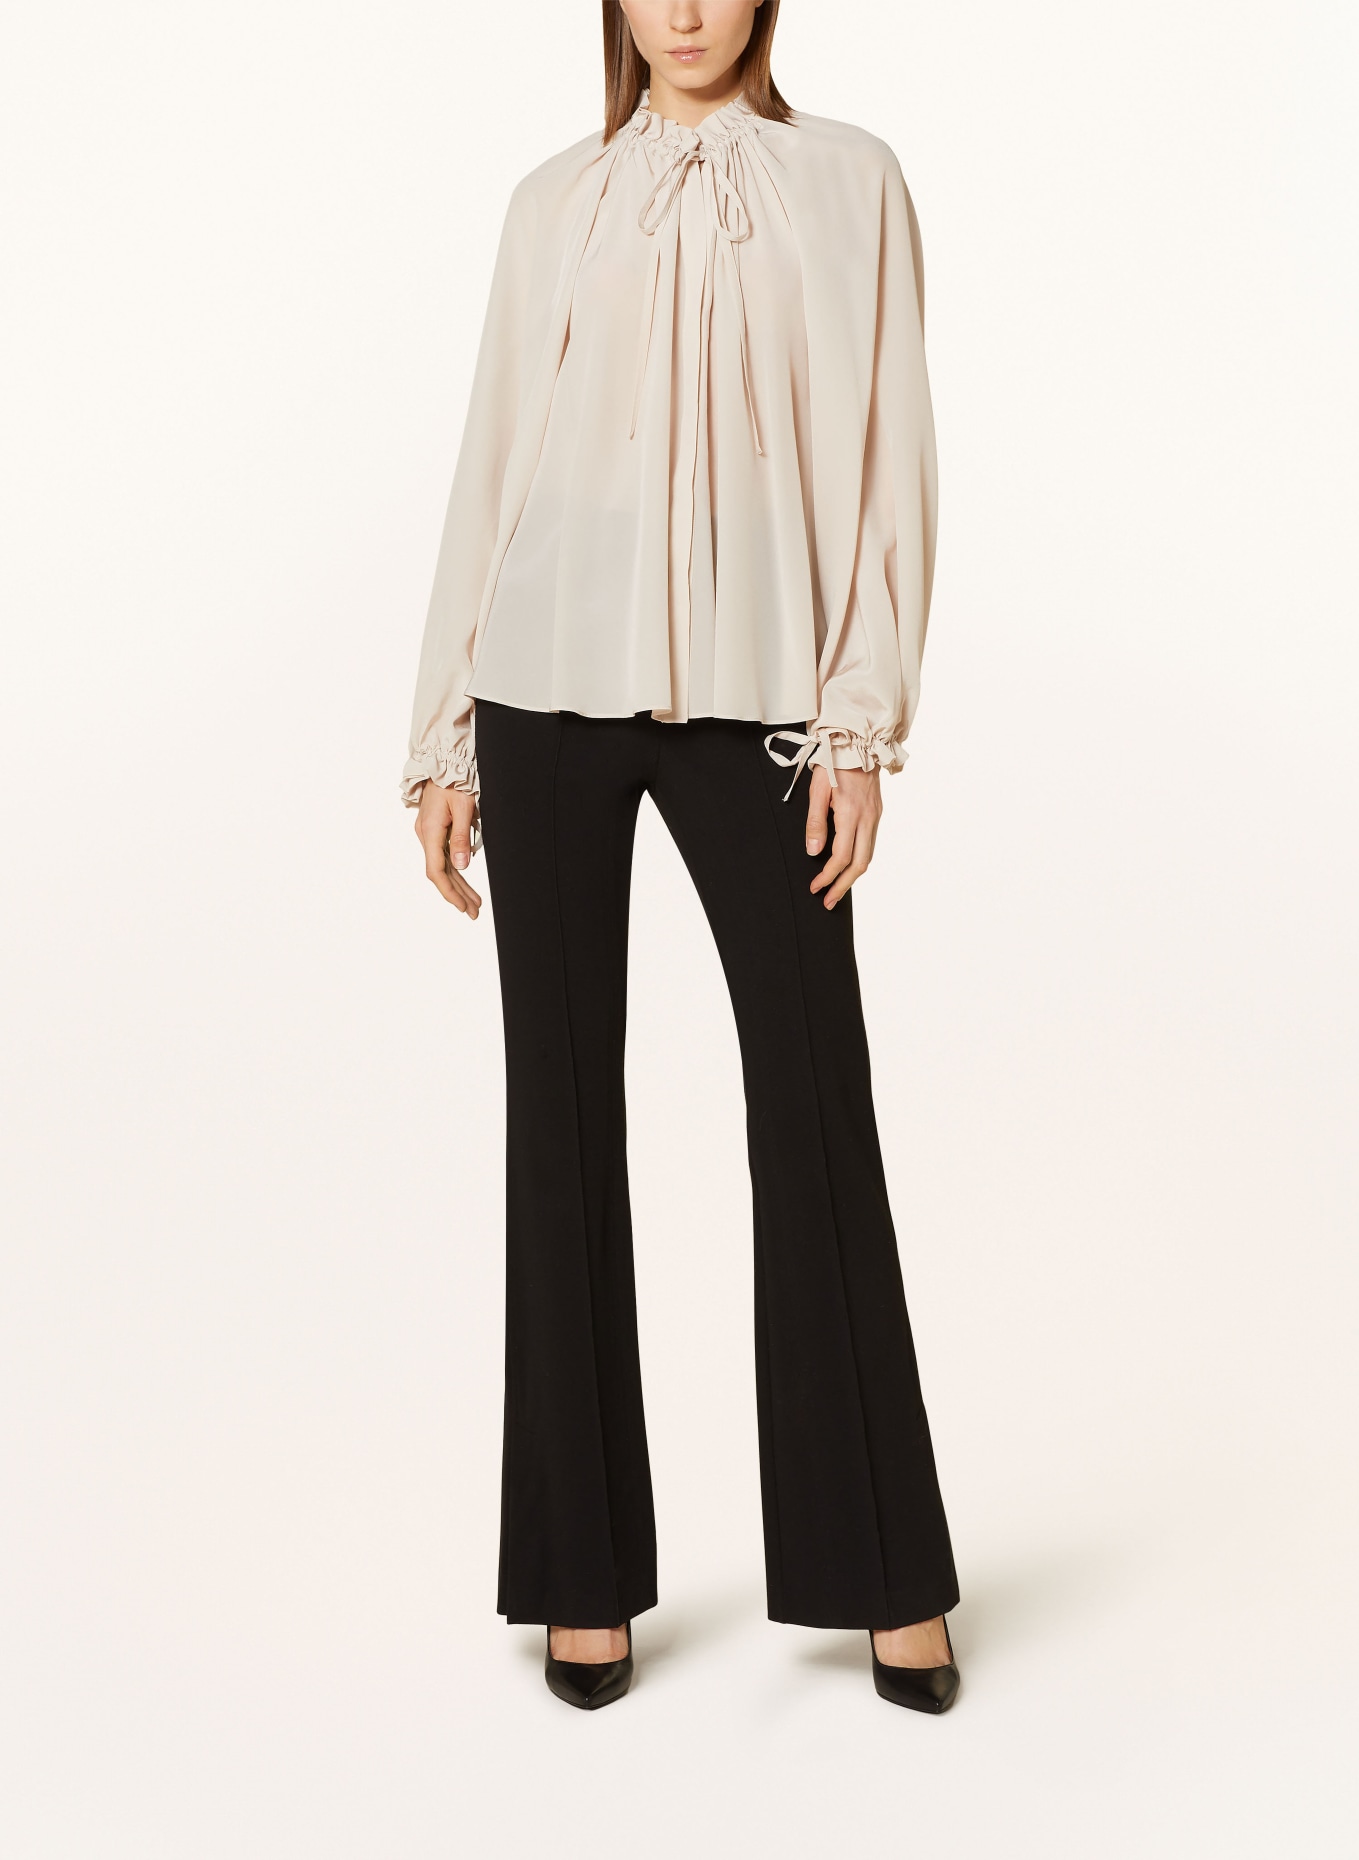 SLY 010 Bow-tie blouse GLENN in silk, Color: CREAM (Image 2)